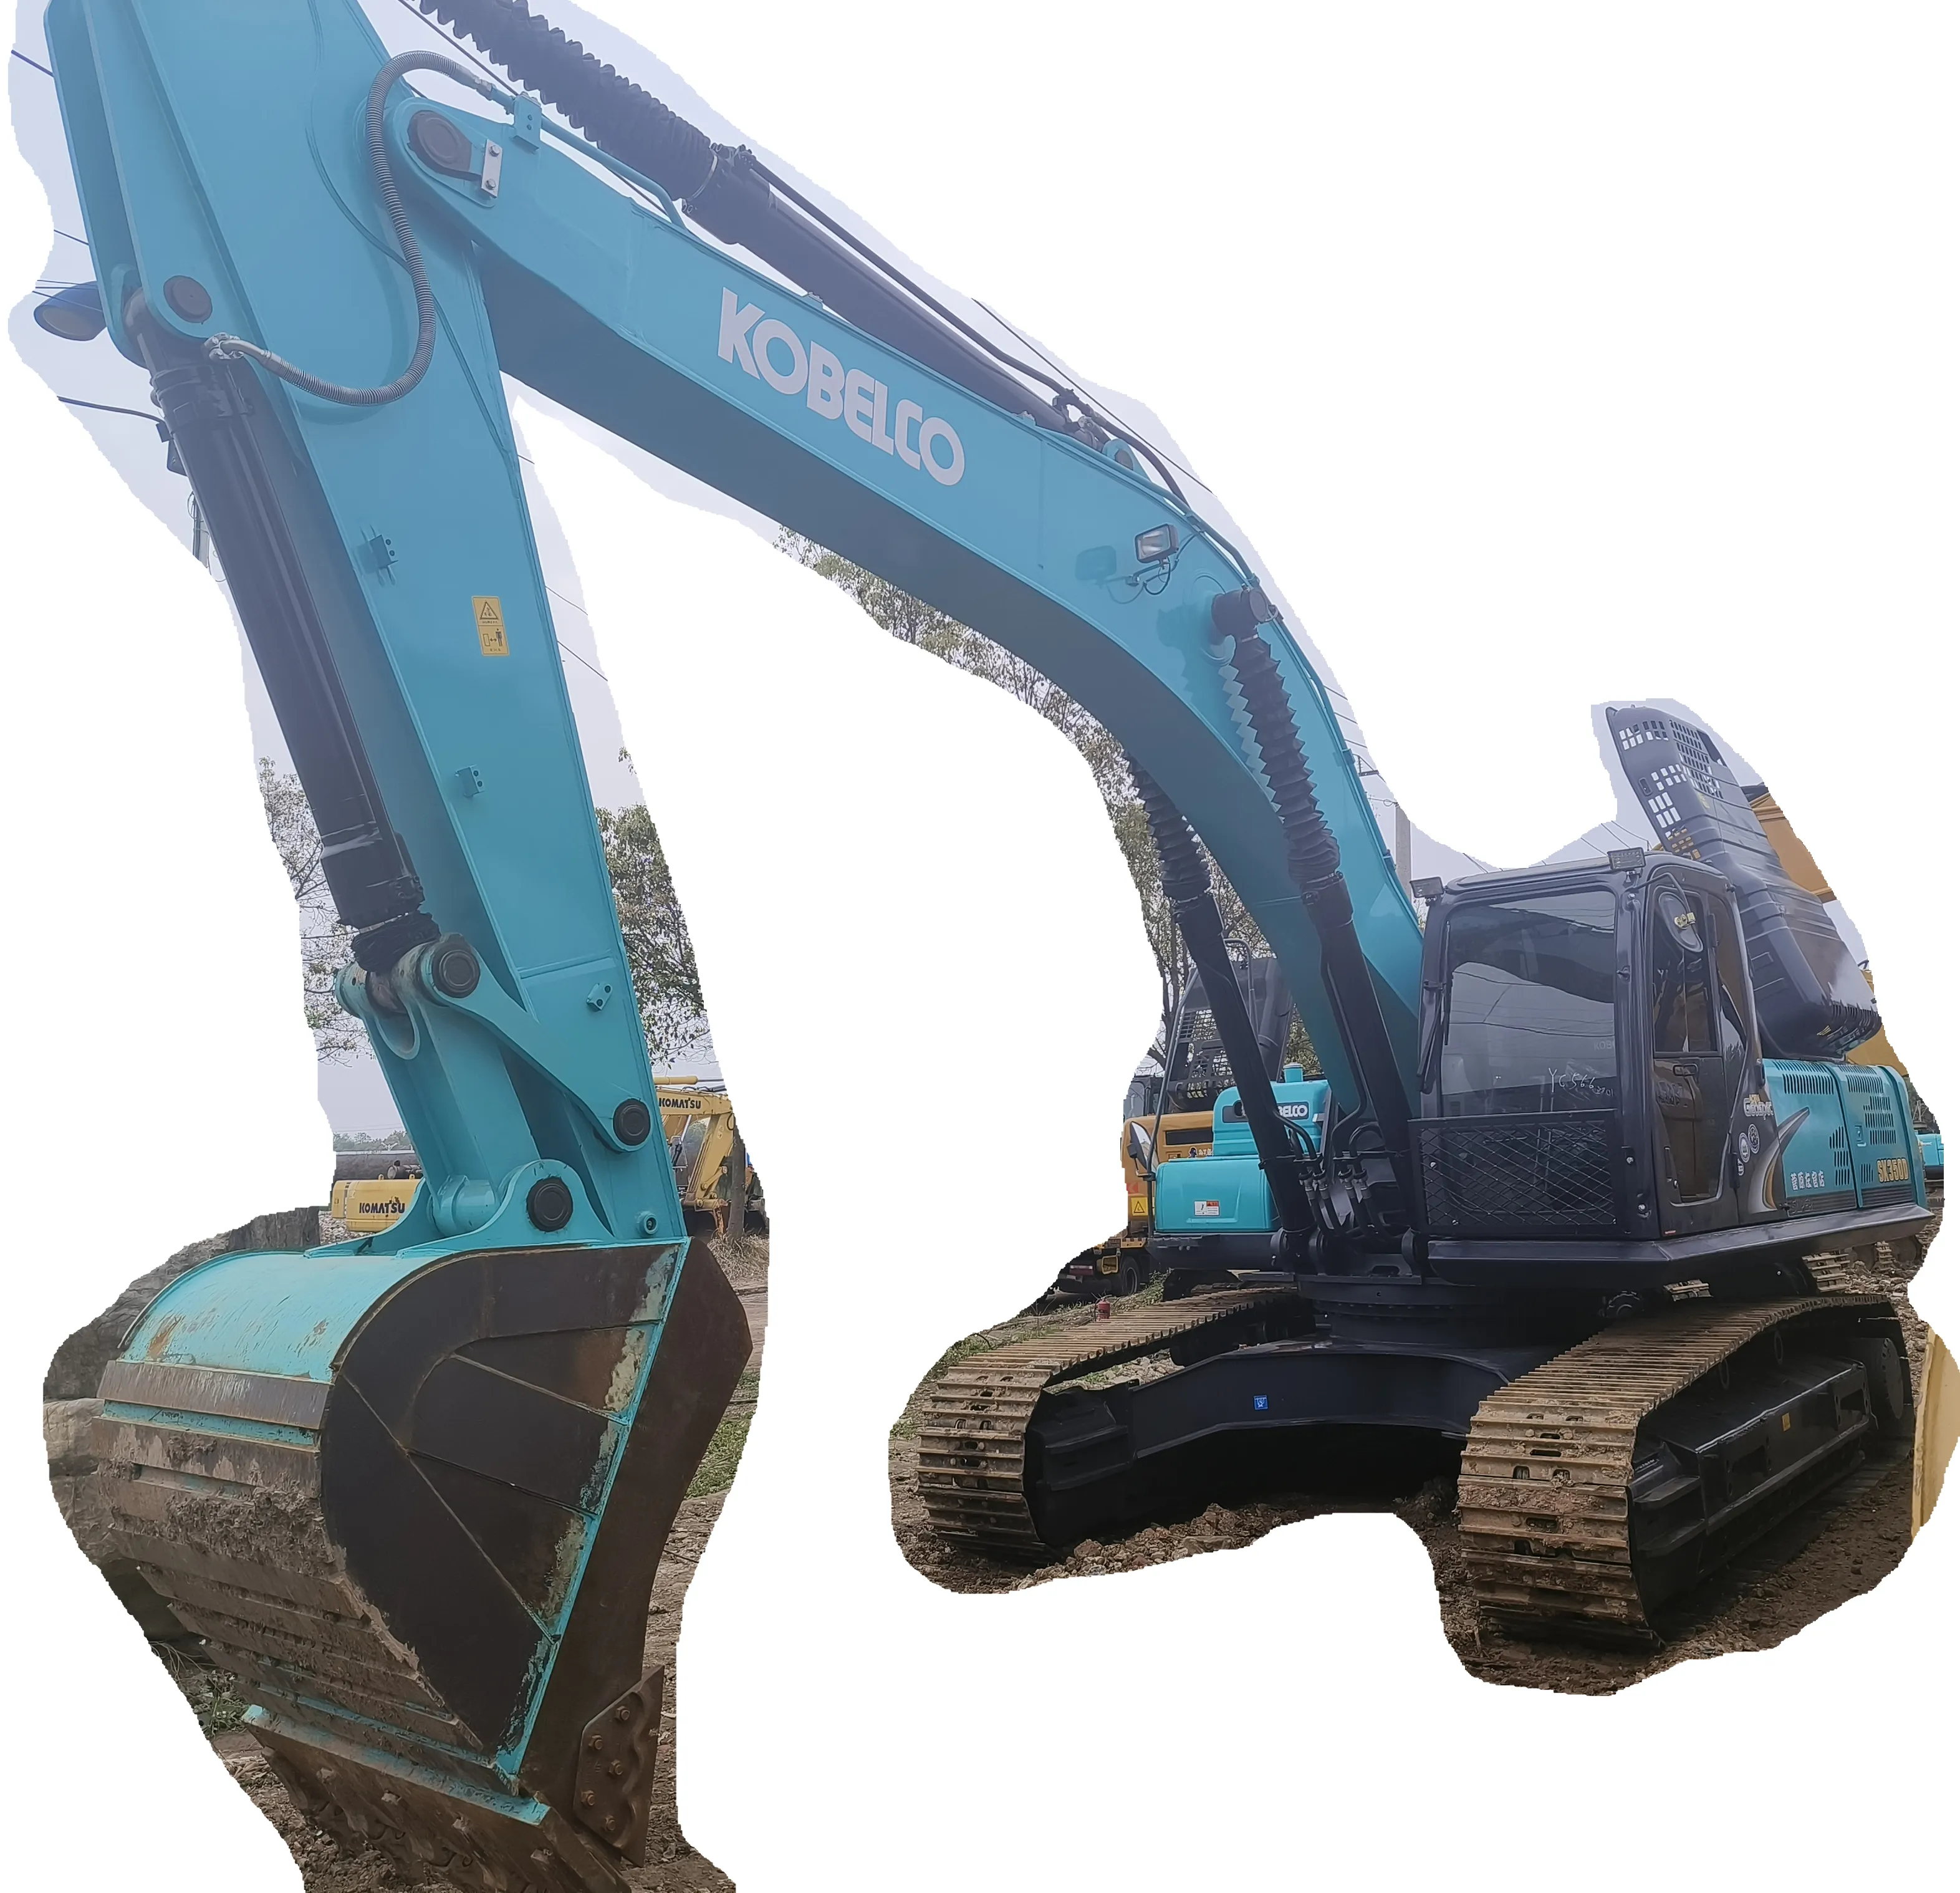 Used excavator Kobelco350 hydraulic crawler excavator 35 tons of construction equipment factory for sale at a low price